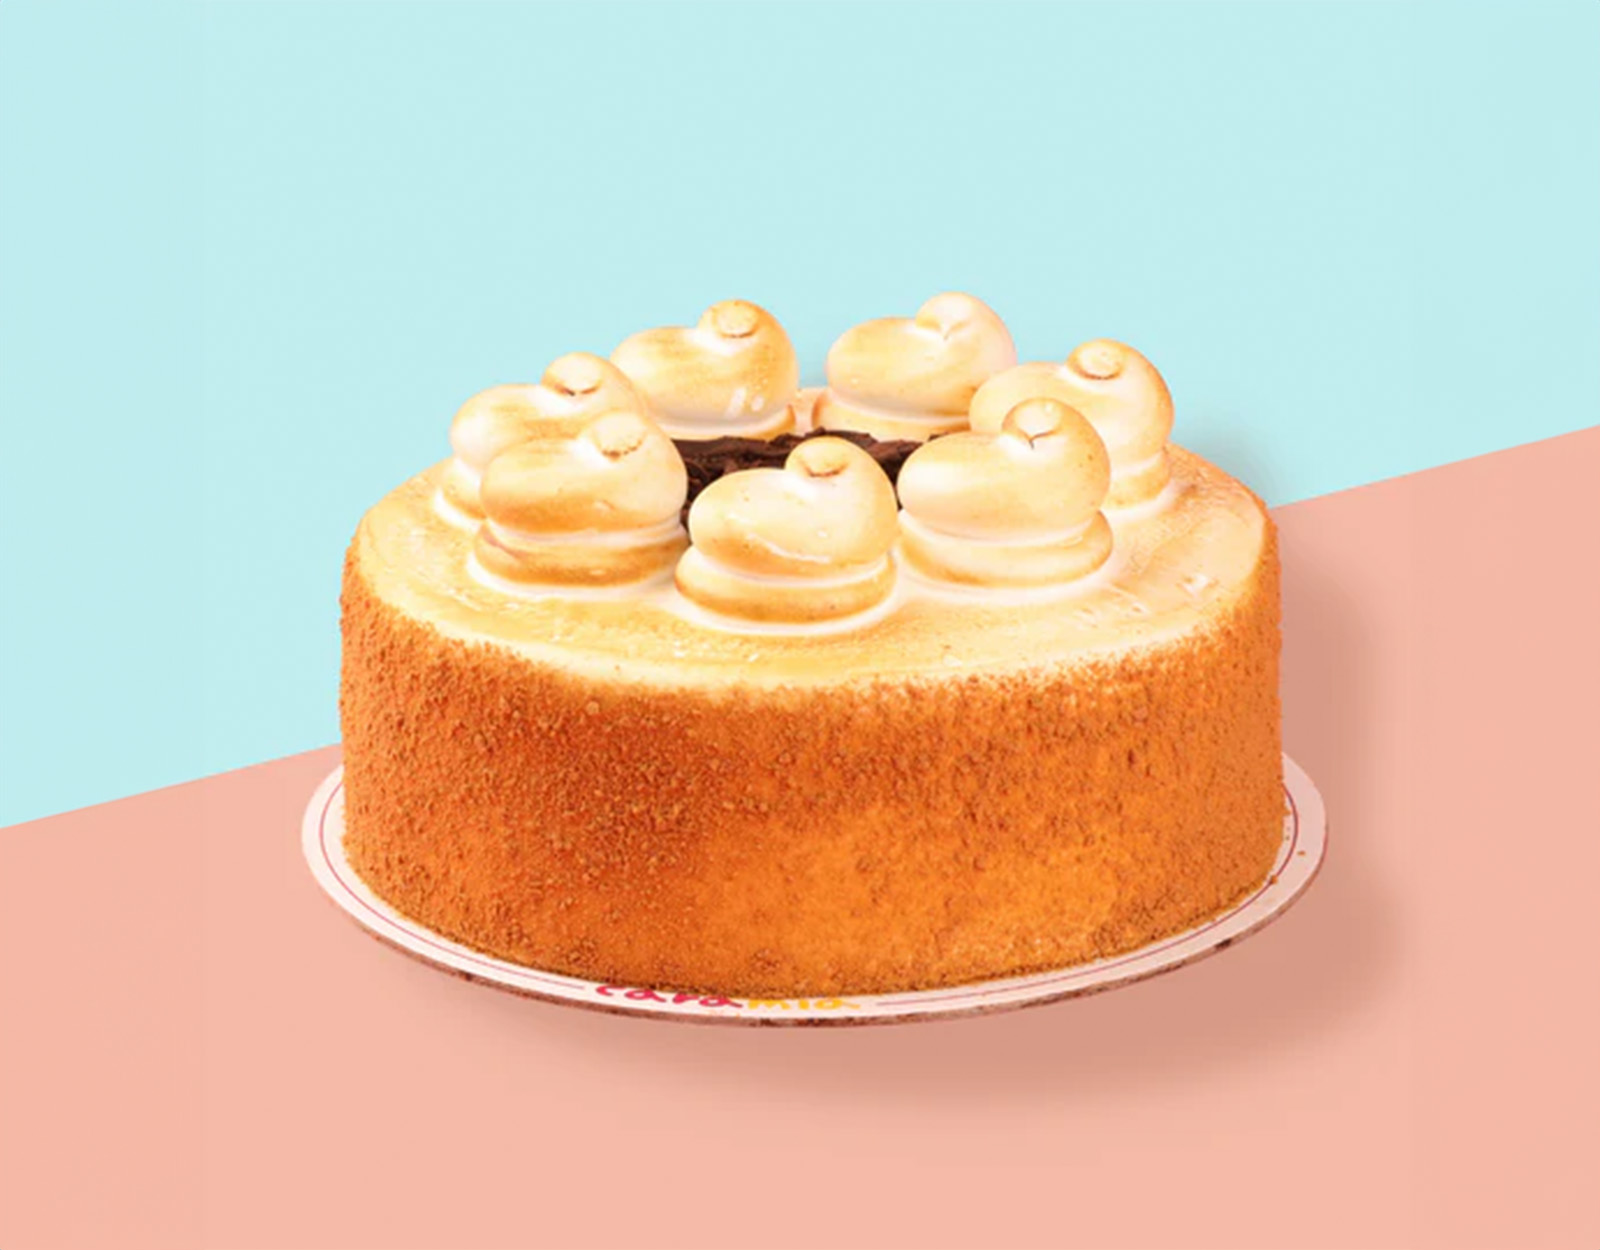 Nothing screams sweet and salty more than Caramia's Salted S'mores Gelato Cake for our kid's birthday!